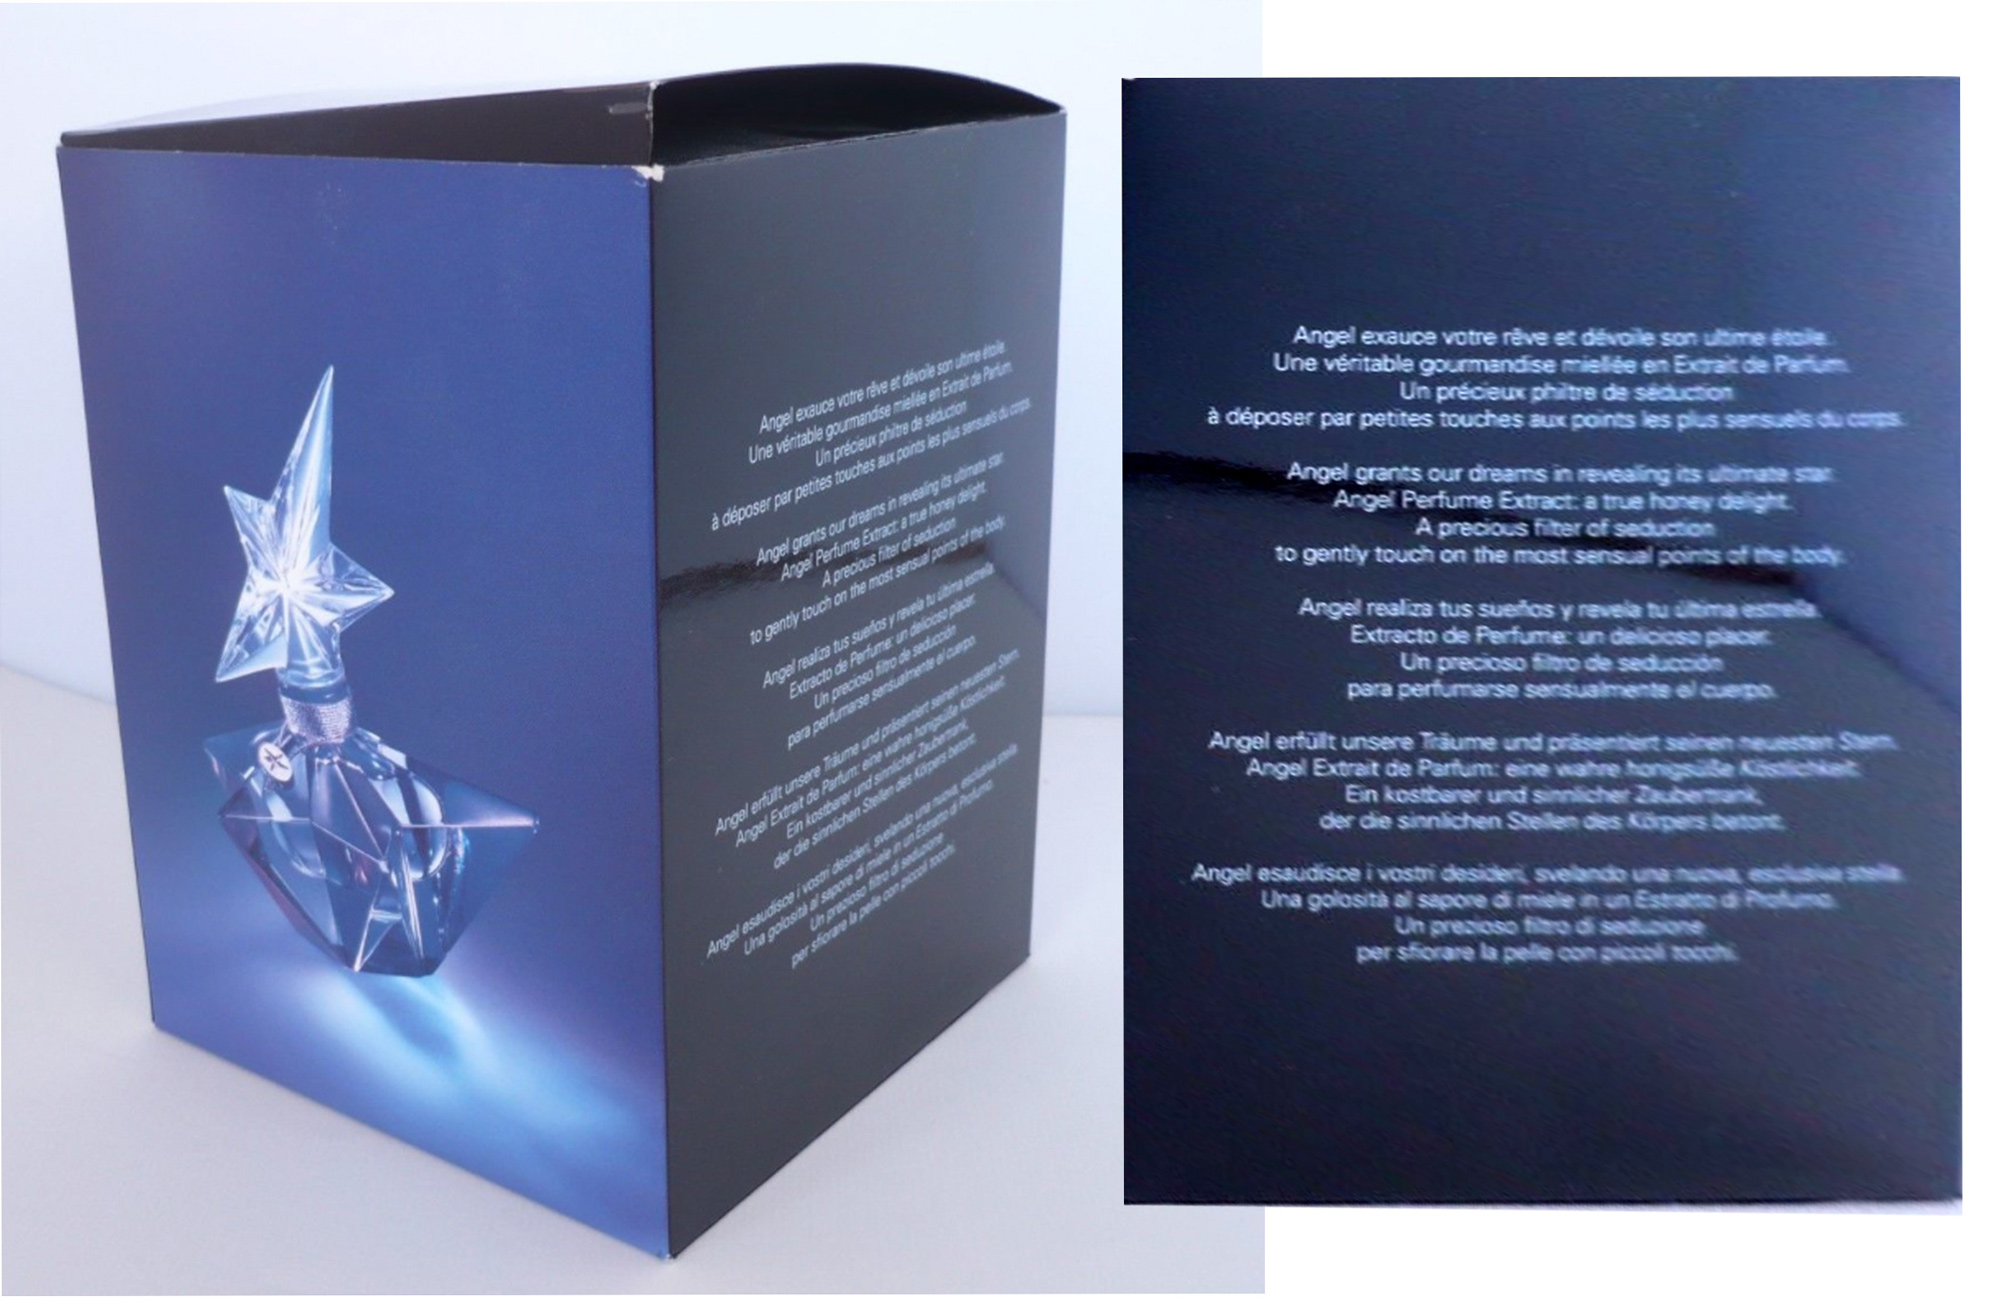 Outer Box Packaging Text Thierry Mugler Angel Perfume Caprice de Star Ultimate Star (Etoile), 2007.